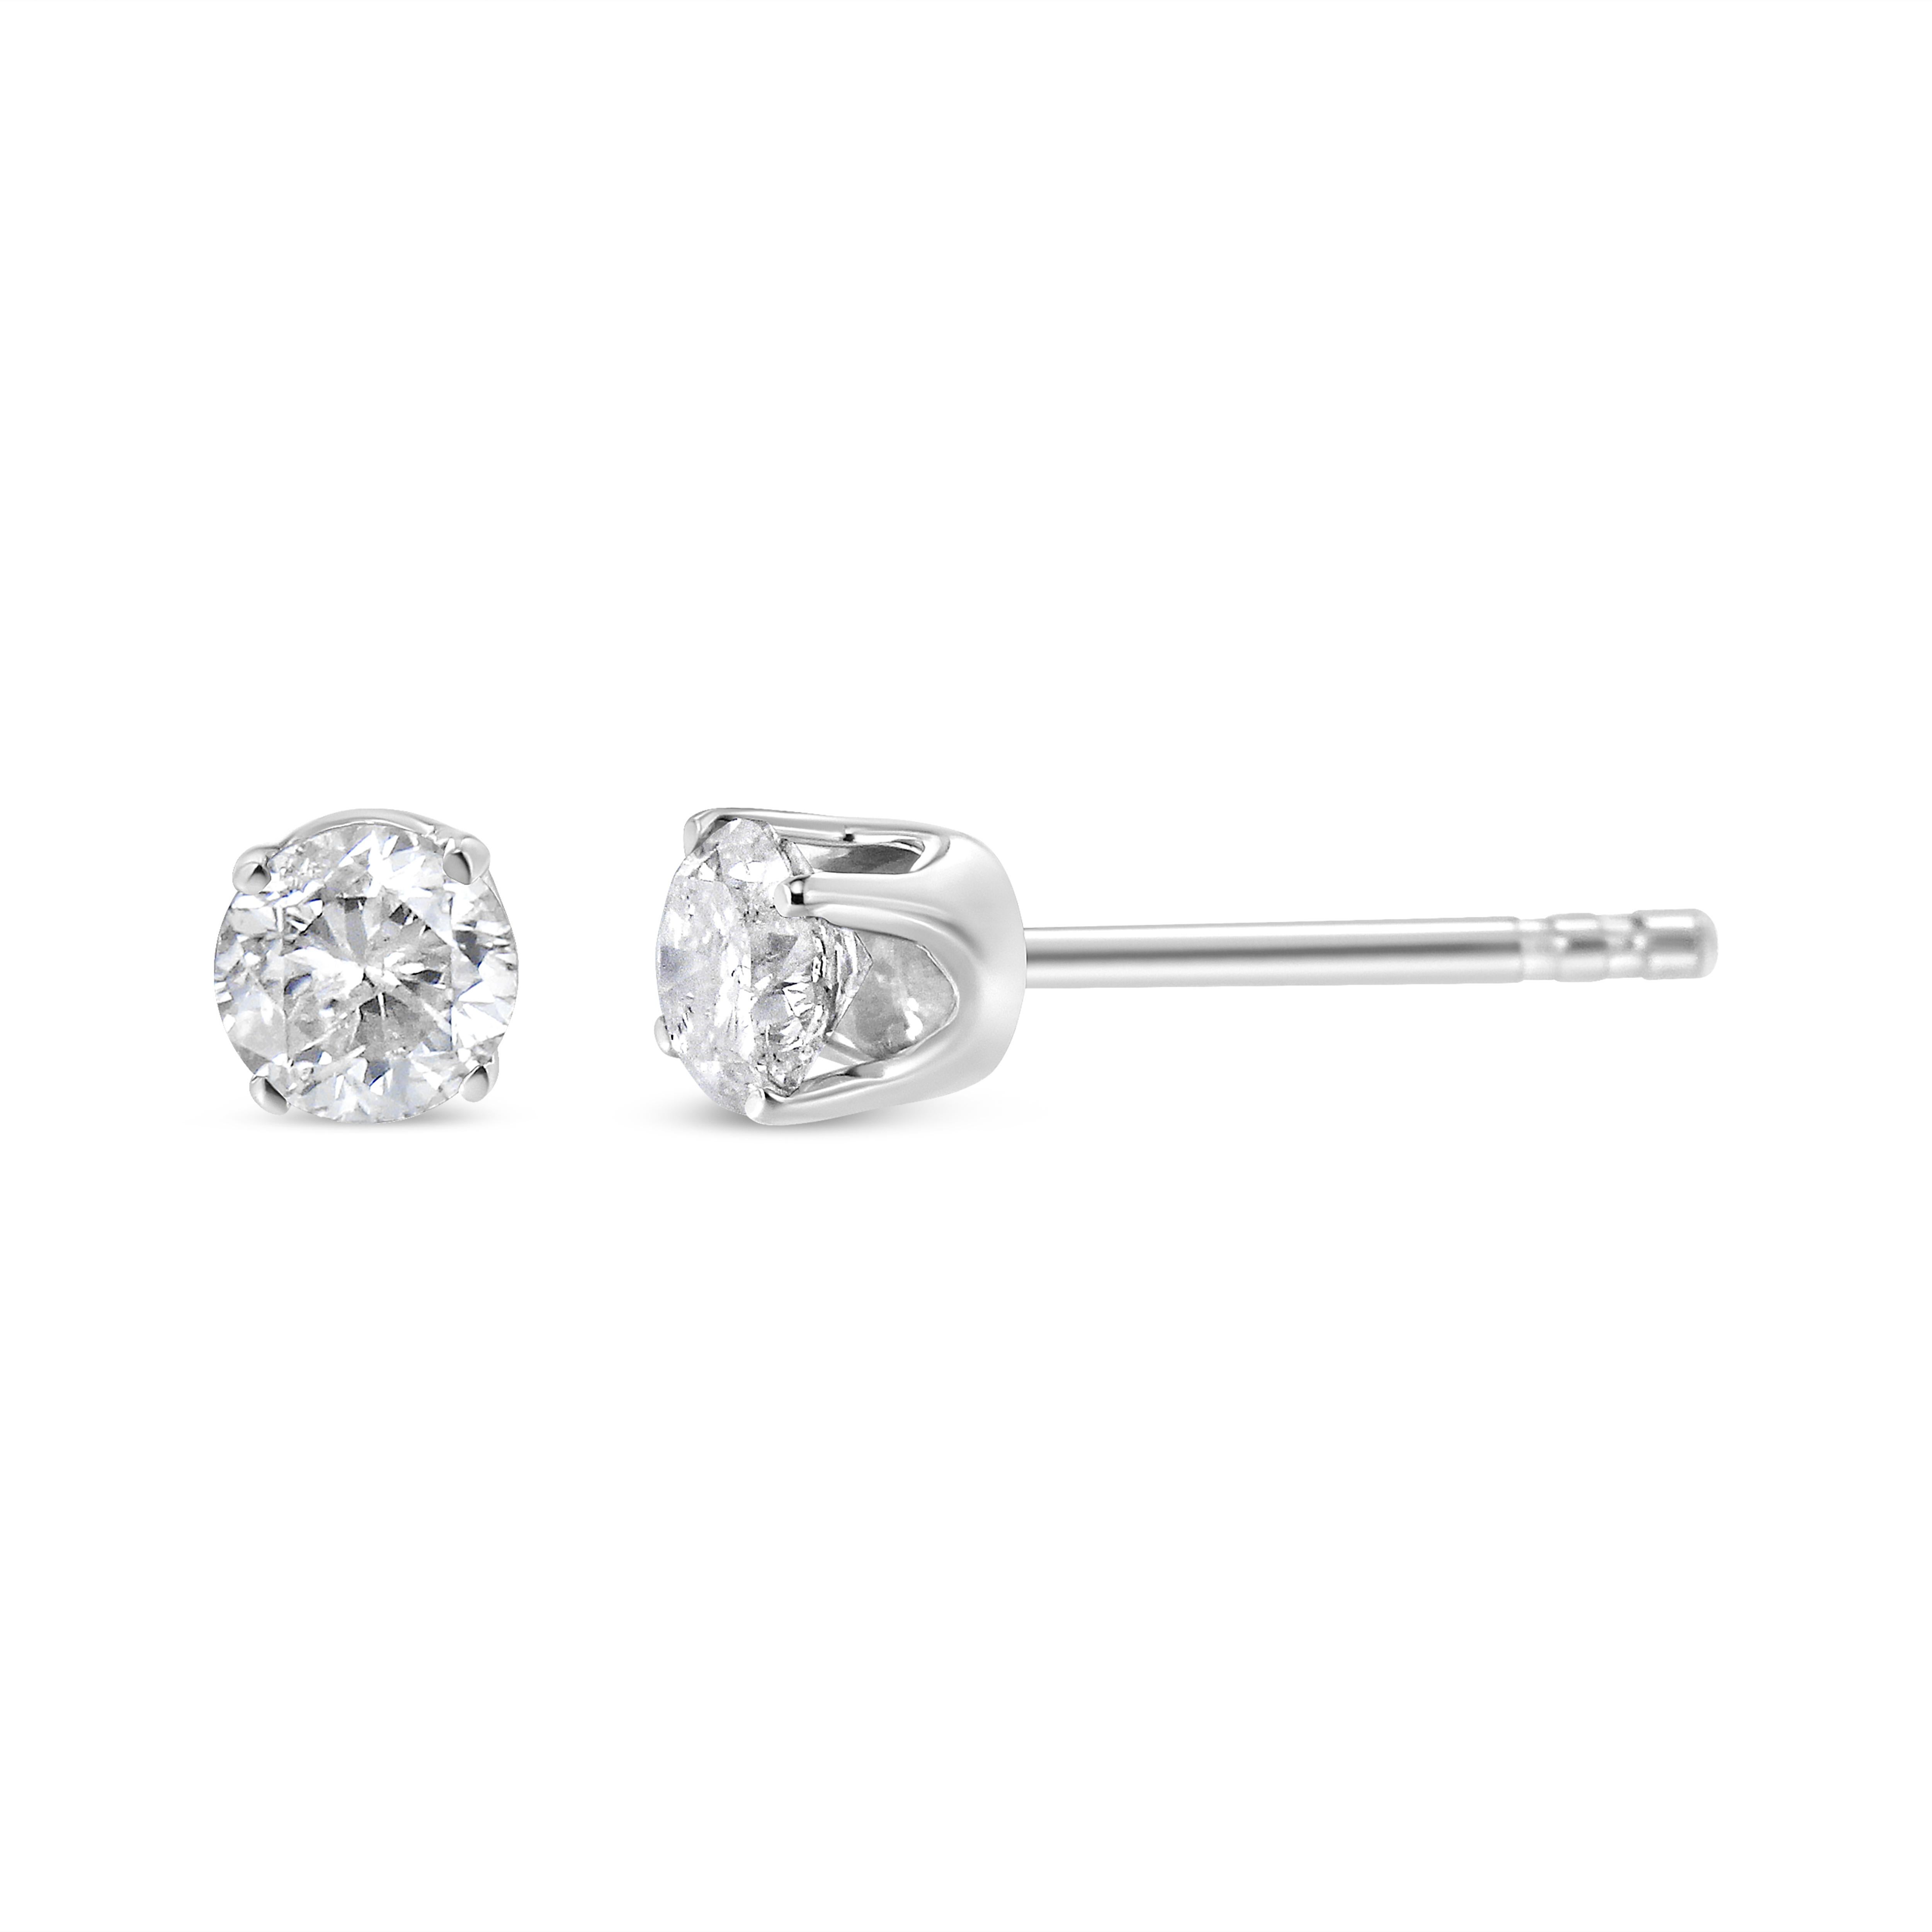 Modern AGS Certified 14K White Gold 1.0 Carat Brilliant Round-Cut Diamond Stud Earrings For Sale